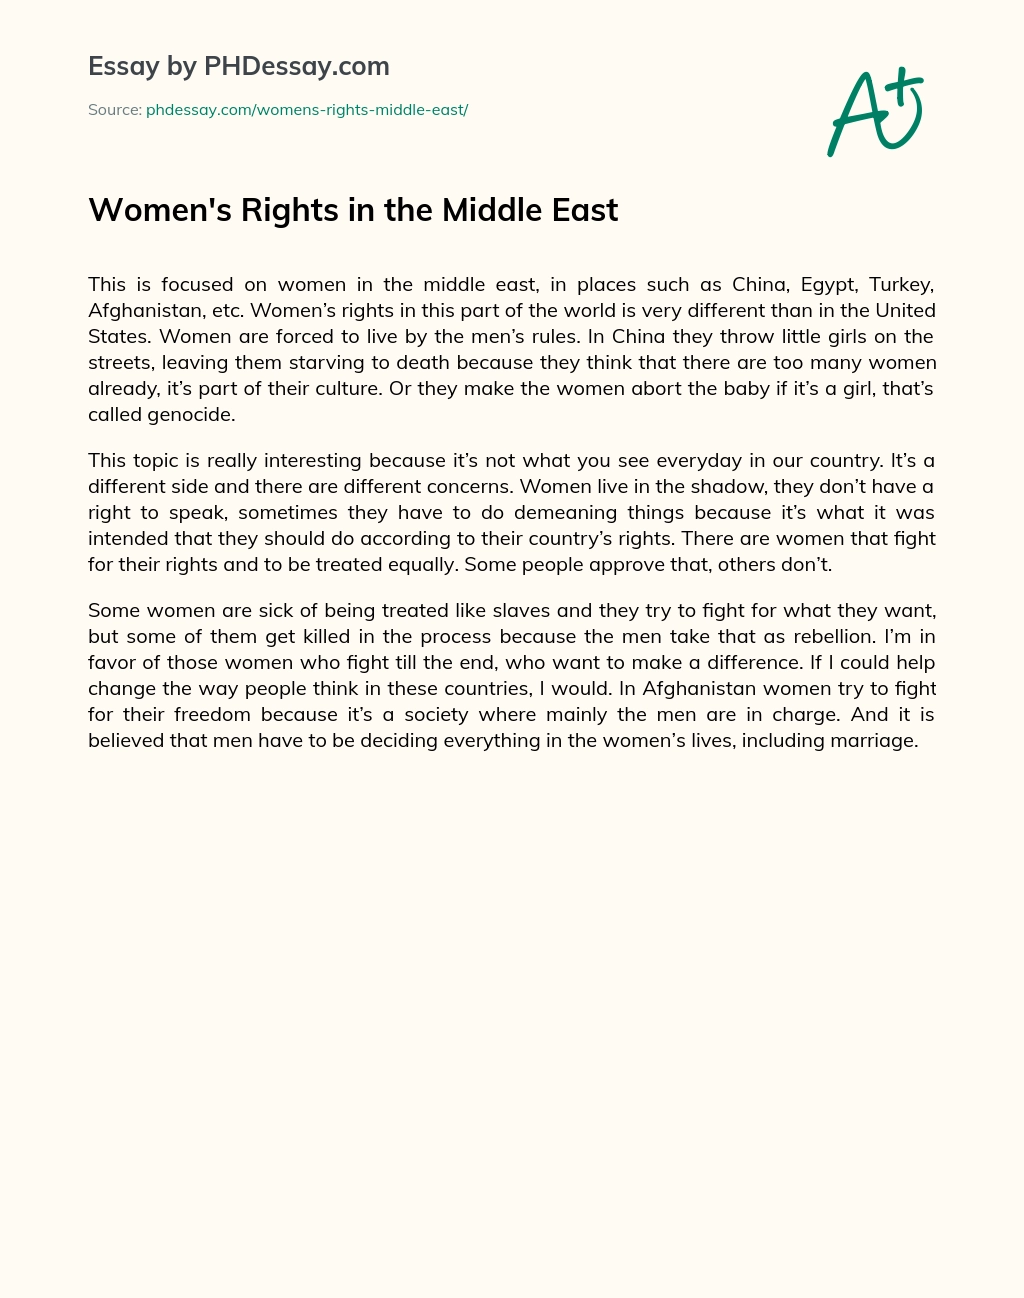 Women’s Rights in the Middle East essay